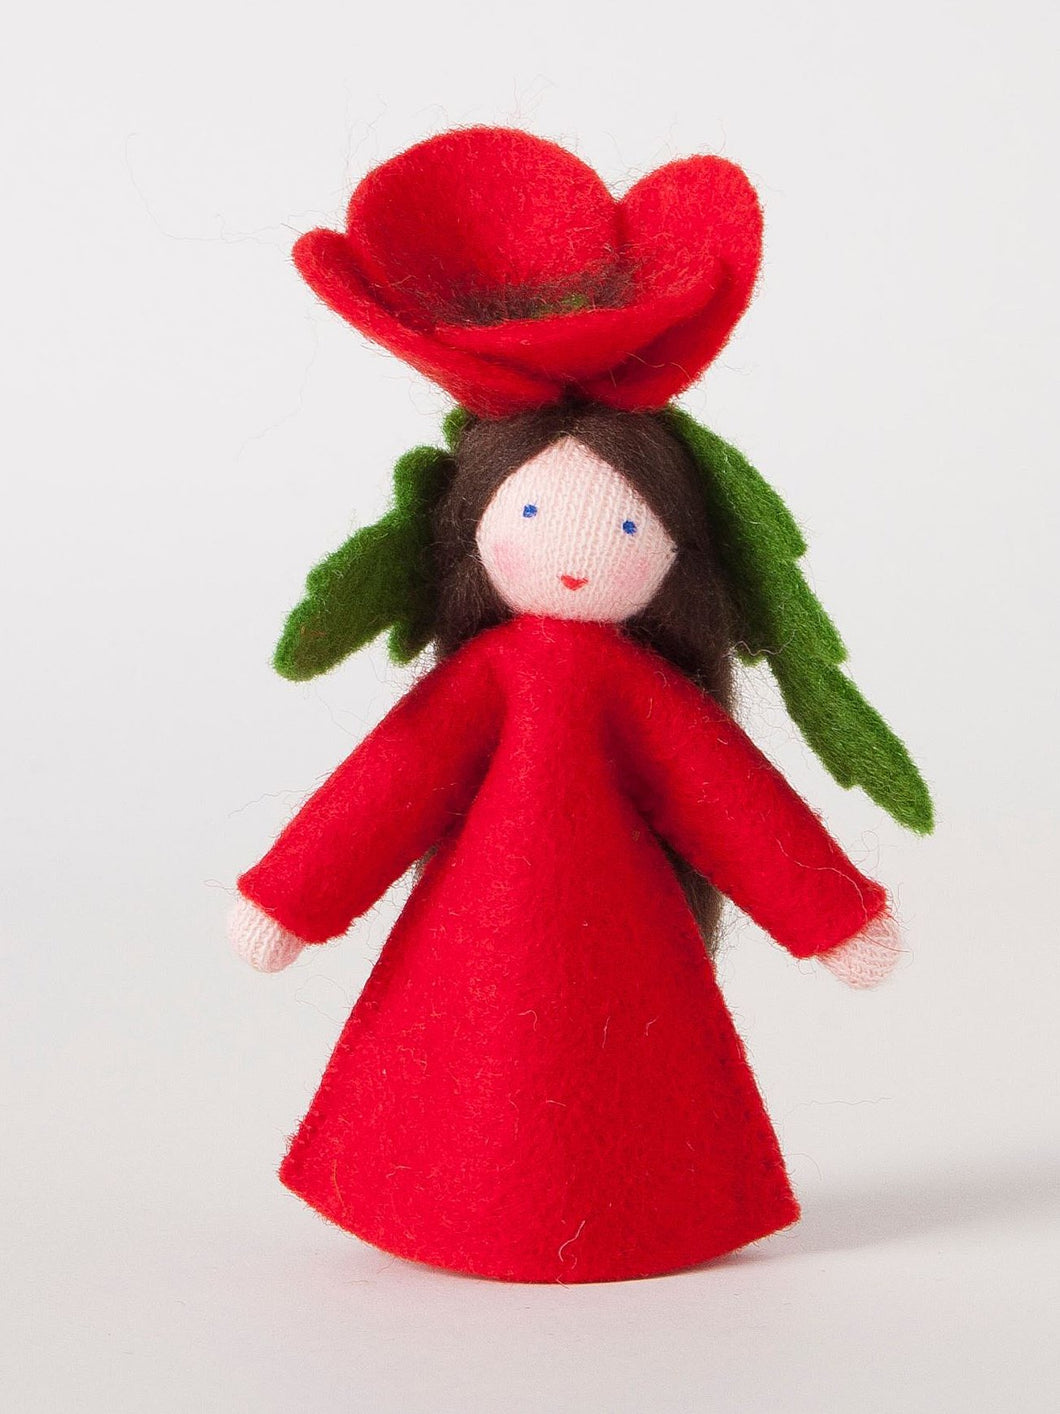 Red Poppy Fairy Felted Waldorf Doll - Four Skin Colors